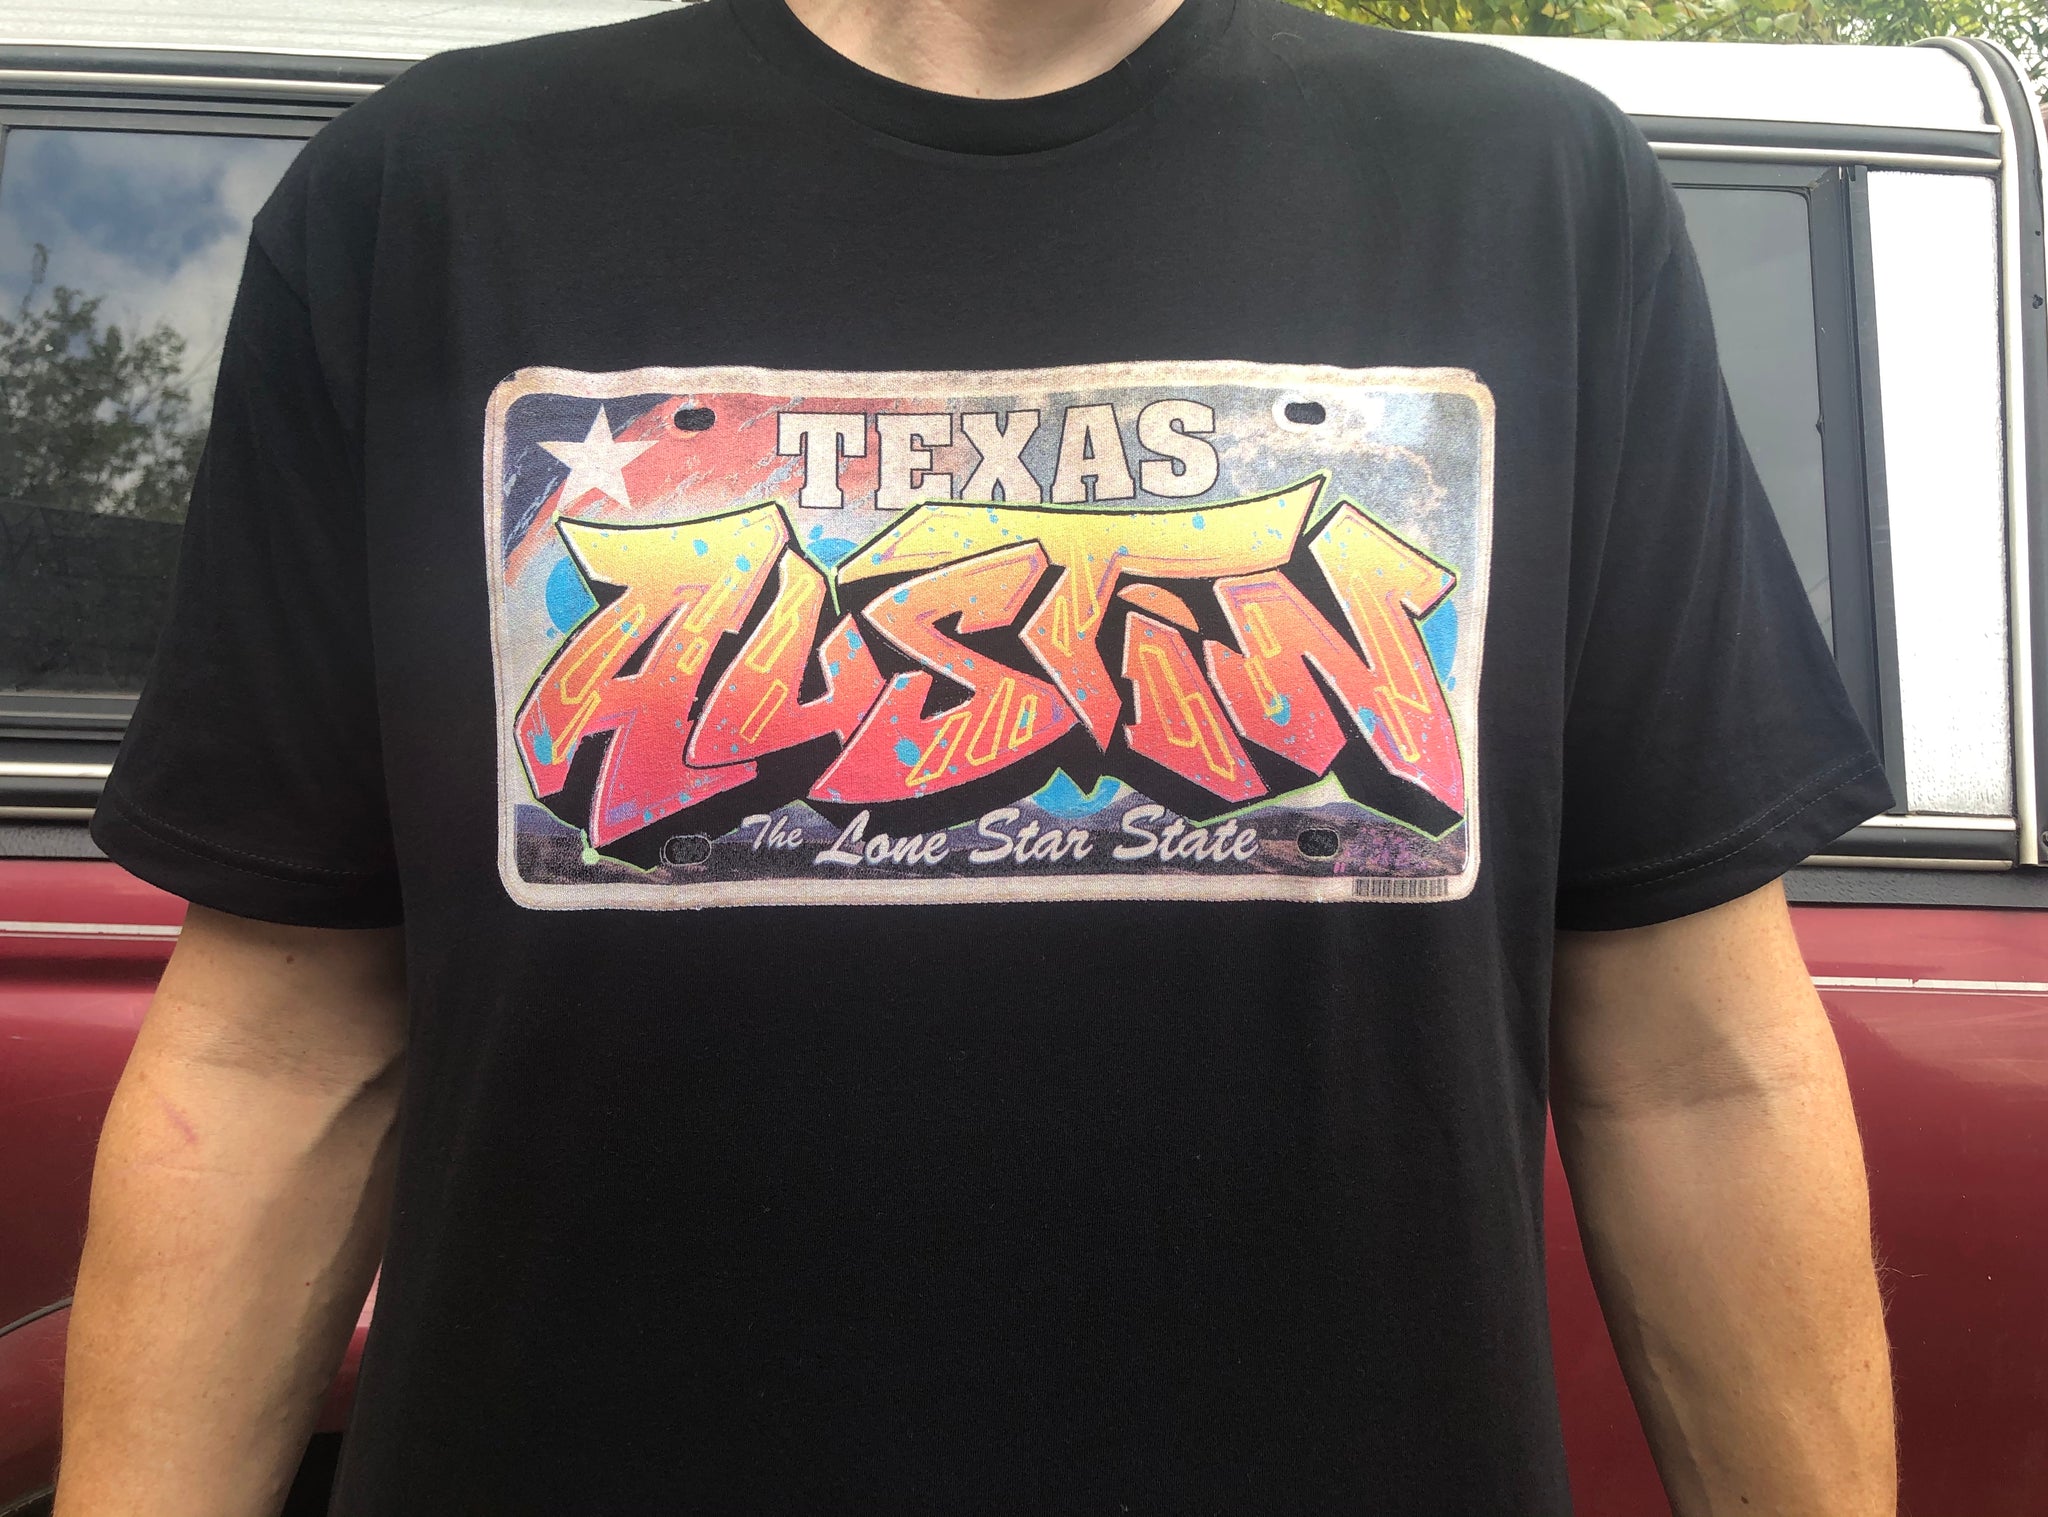 Limited Edition "Austin" Texas license plate T shirt